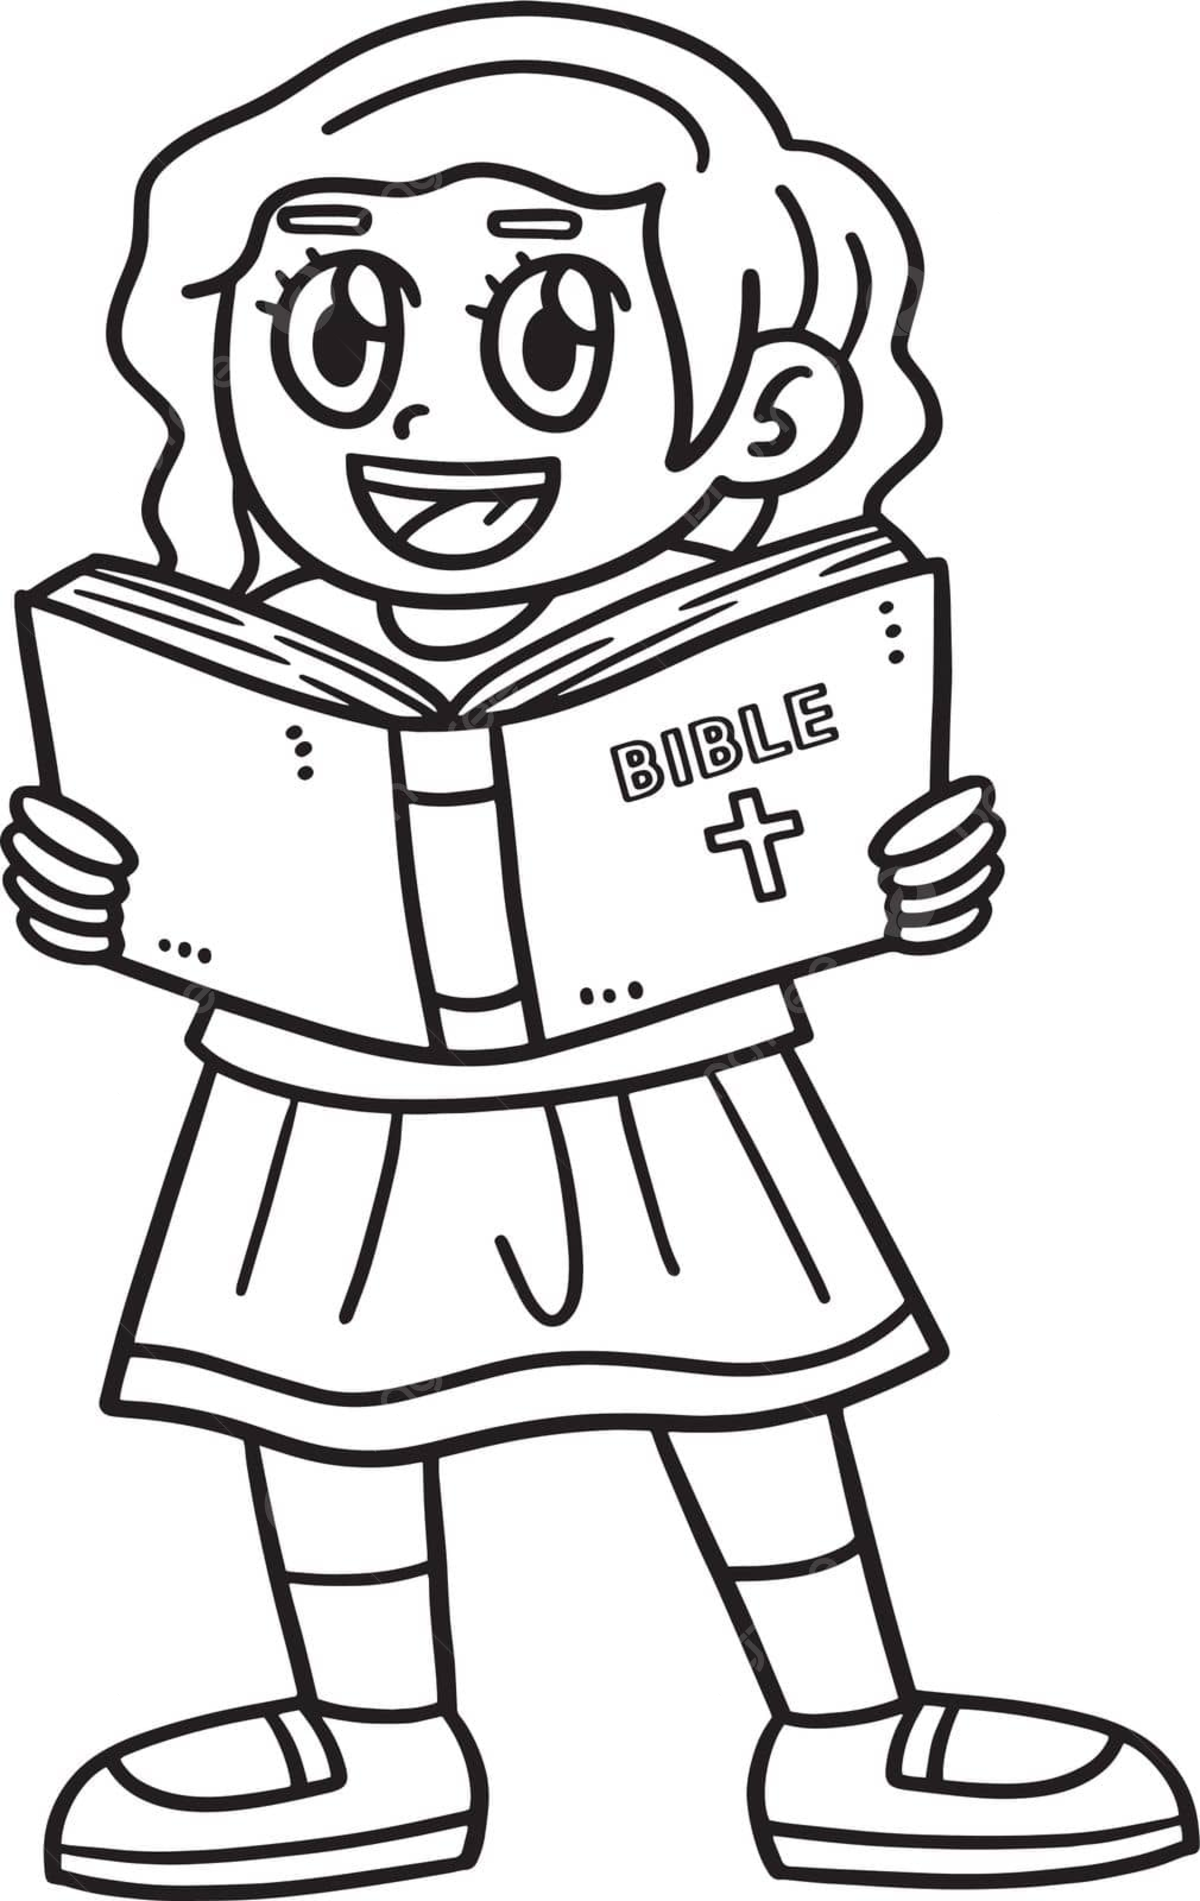 Christian girl reading the bible isolated coloring reading drawing coloring book vector book drawing wing drawing girl drawing png and vector with transparent background for free download